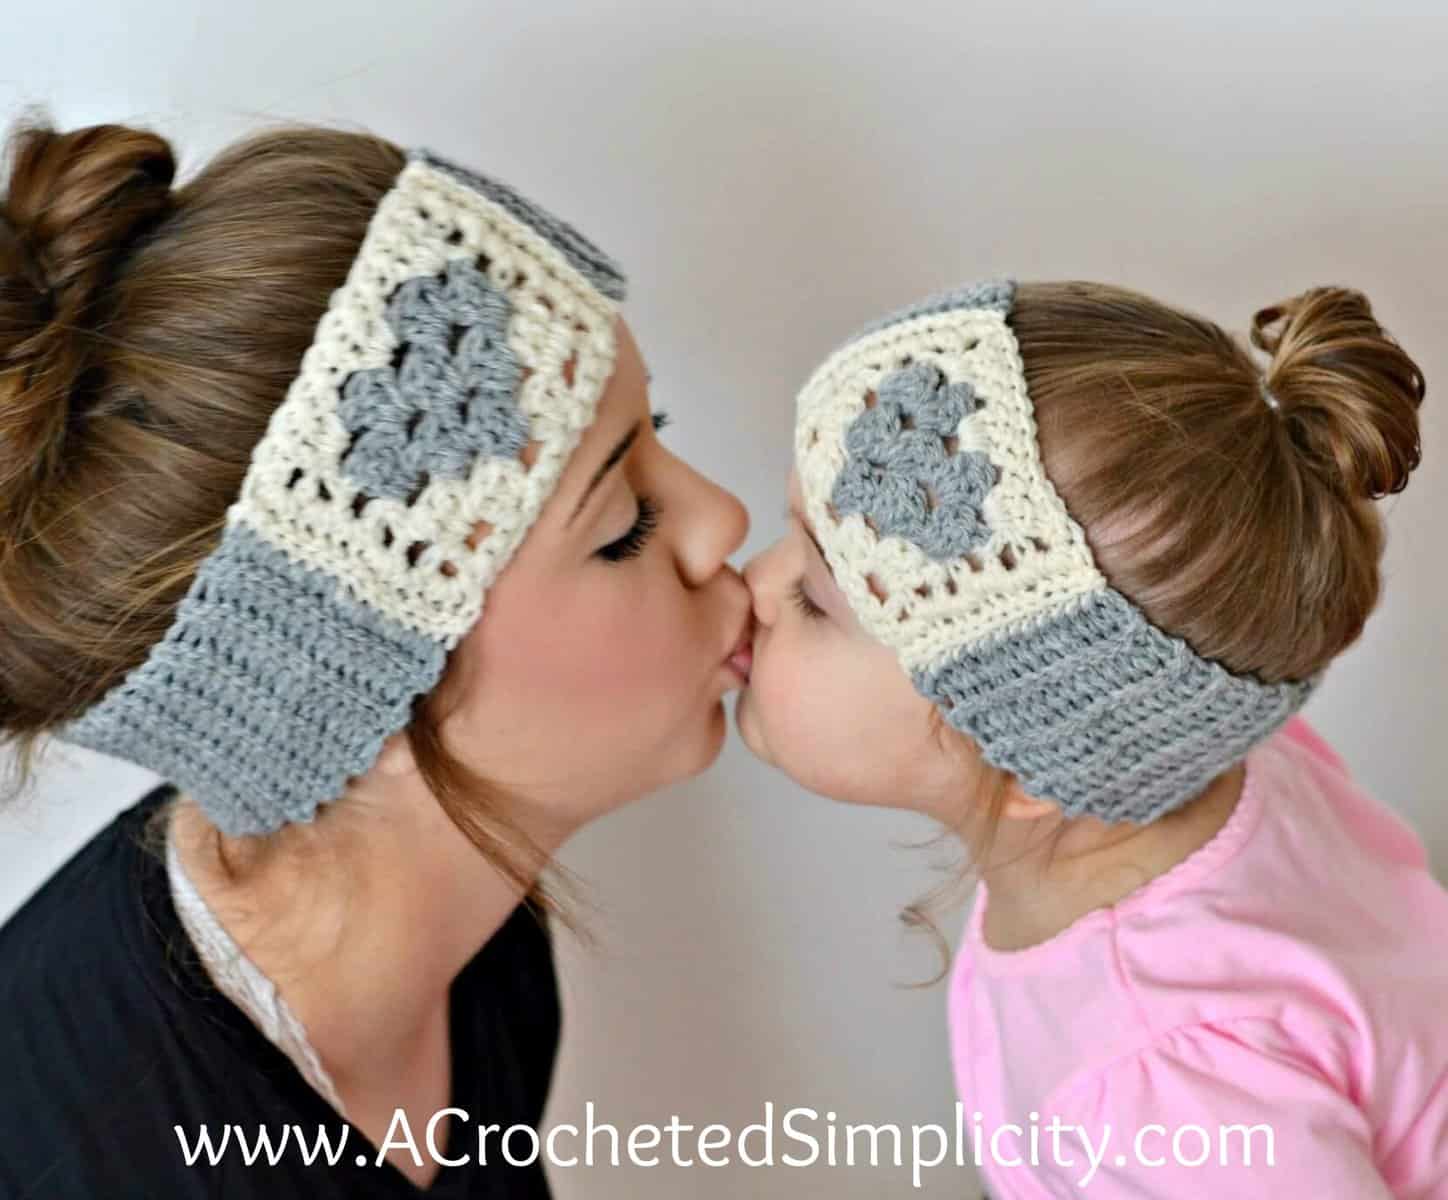 Sisters wearing cream and medium grey crochet ear warmers with hearts in granny stitch.